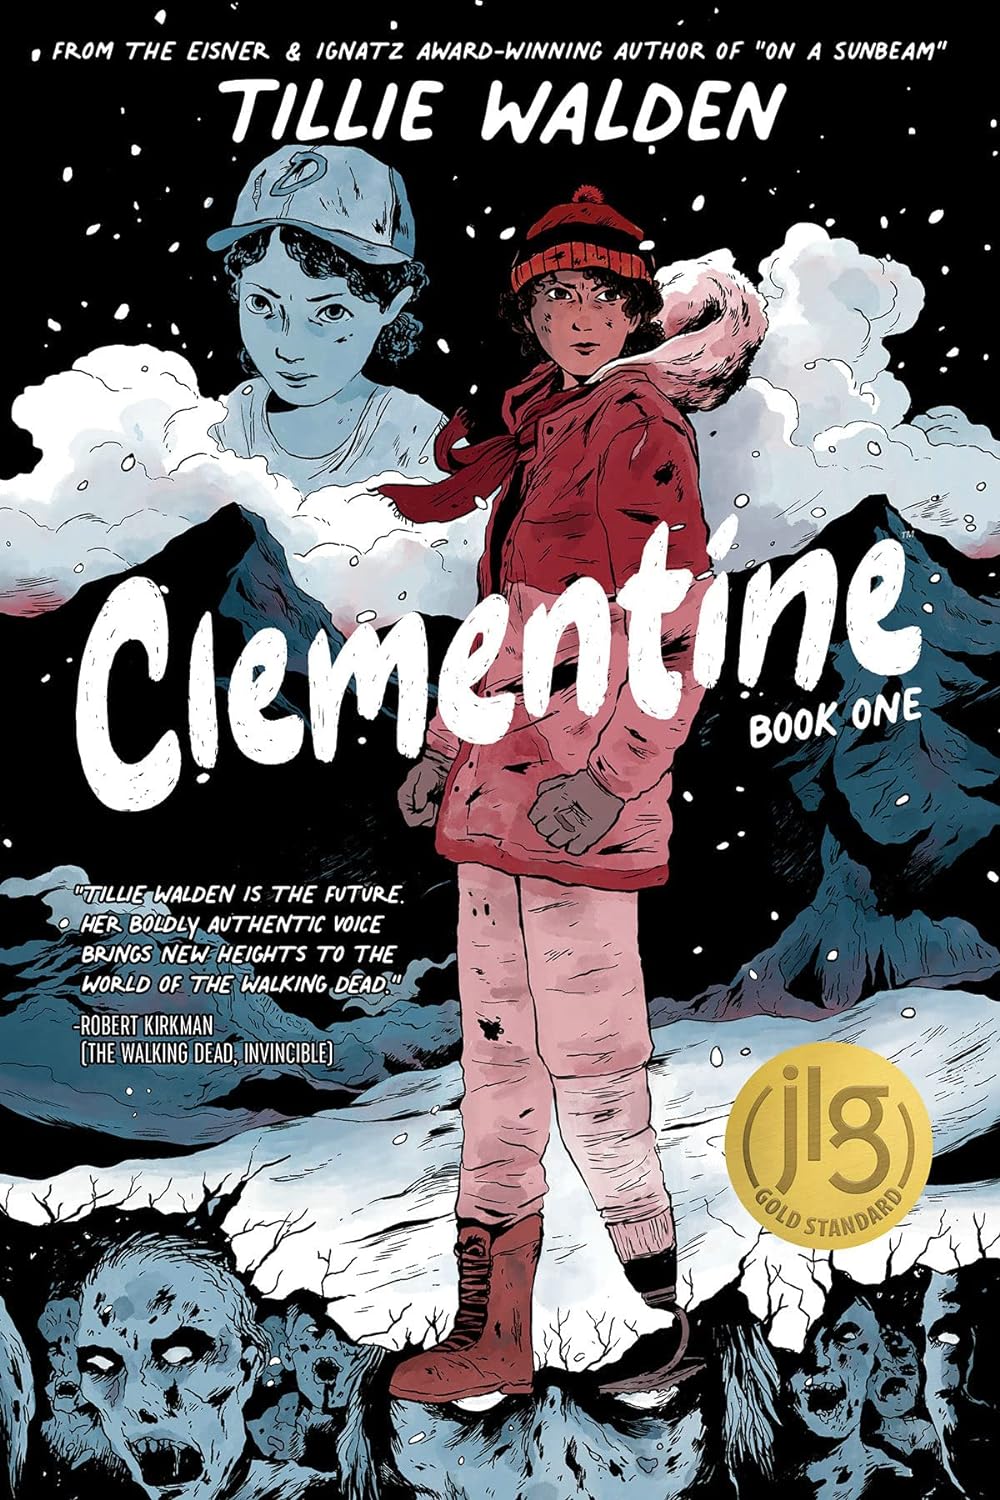 The book cover for Clementine Volume 1 shows a young girl dressed in red stood in a wintery landscape. At the base of the cover is a crowd of zombies.